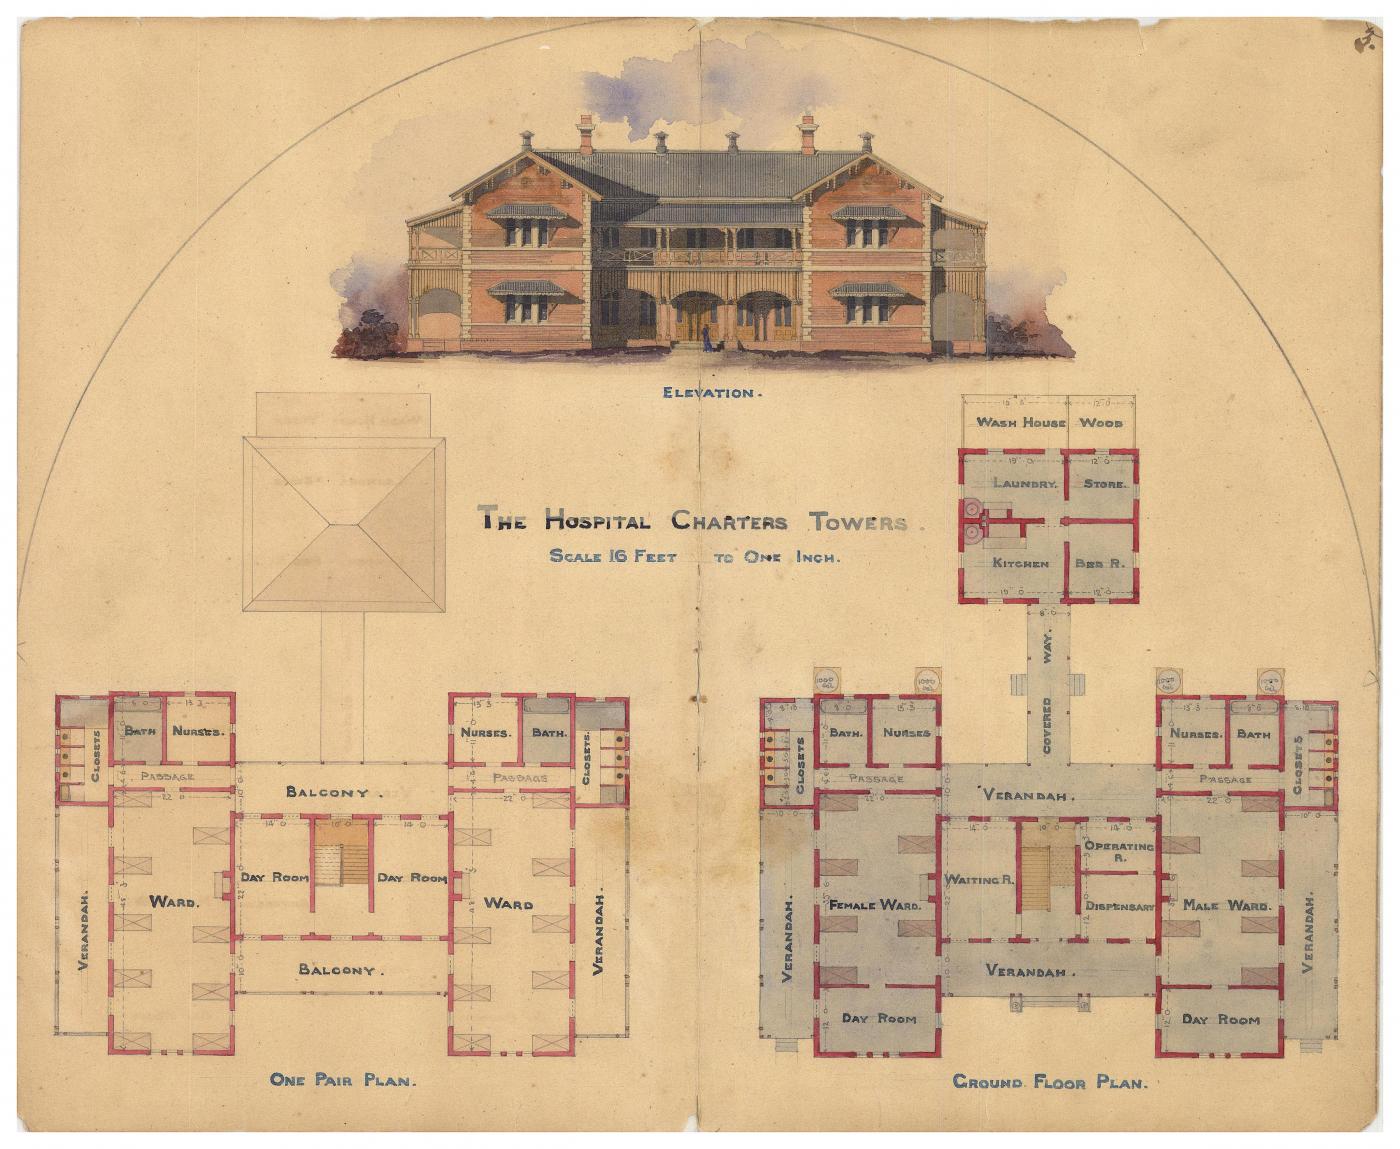 Architectural drawing of the Hospital, Charters Towers